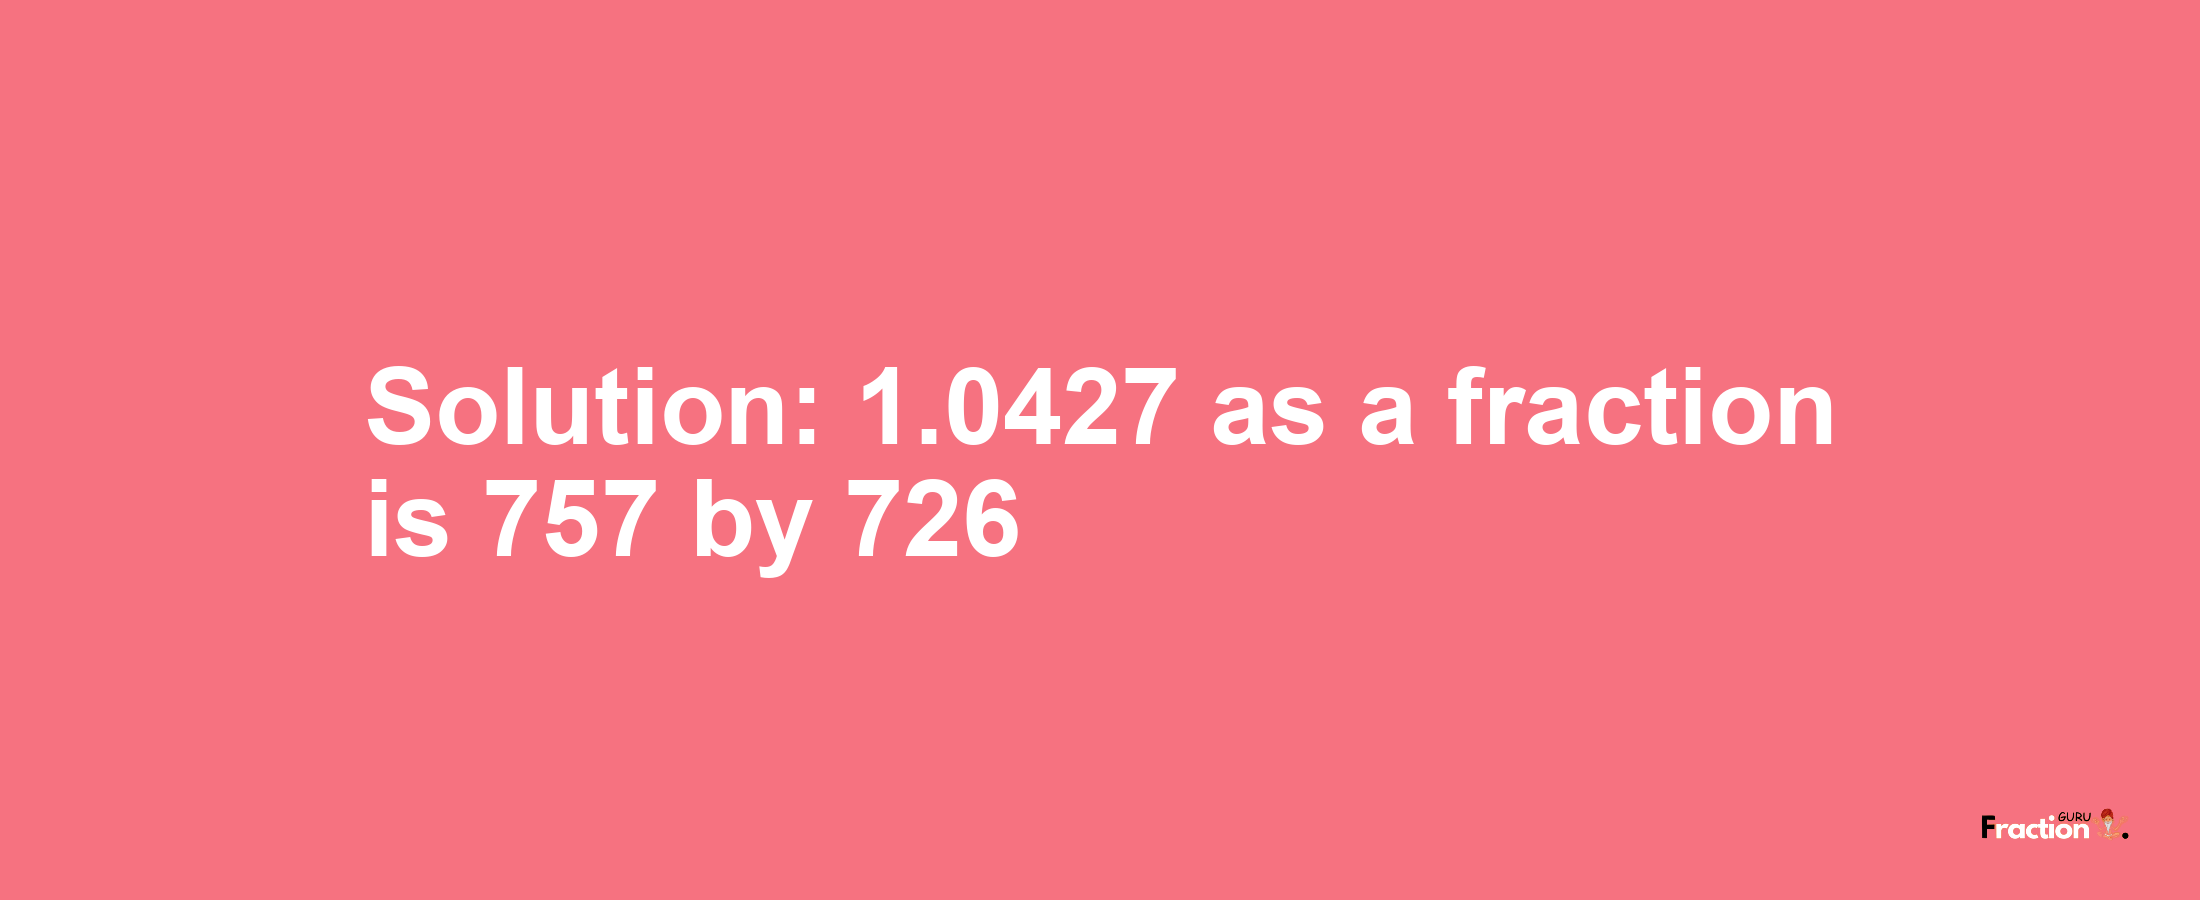 Solution:1.0427 as a fraction is 757/726